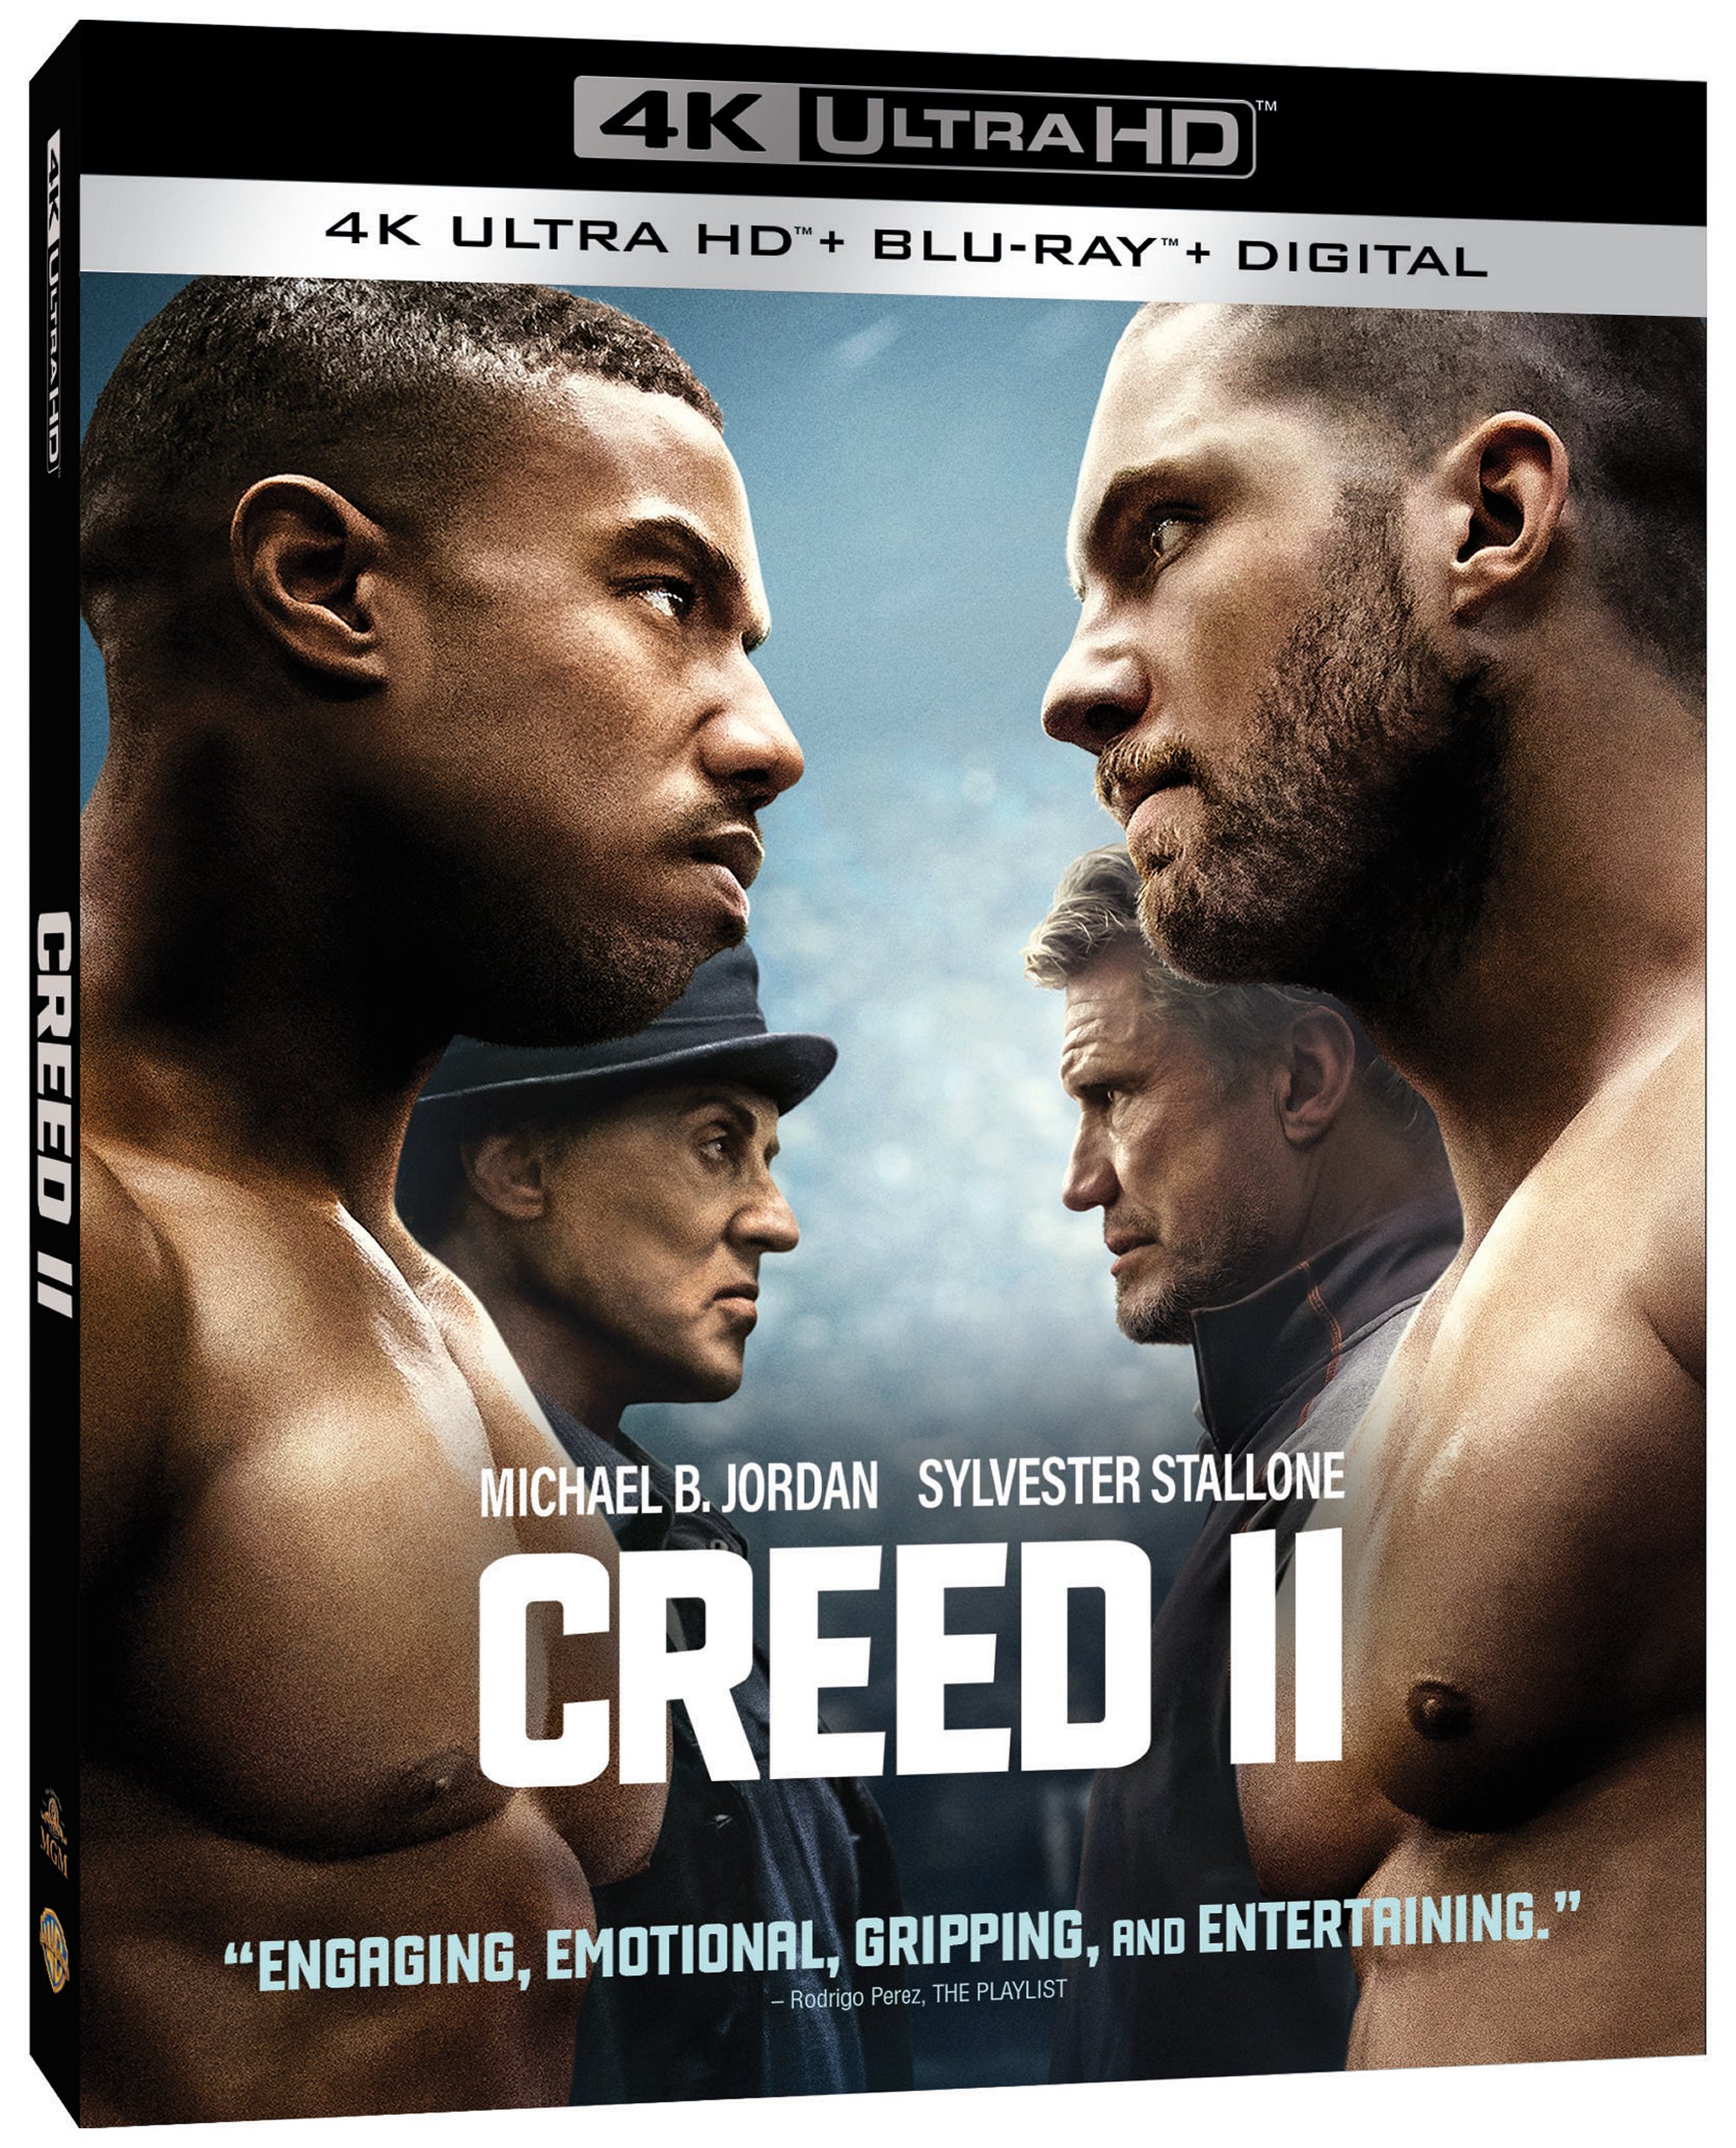 Creed 2 4K Ultra HD Combo Pack cover (Warner Bros. Home Entertainment)